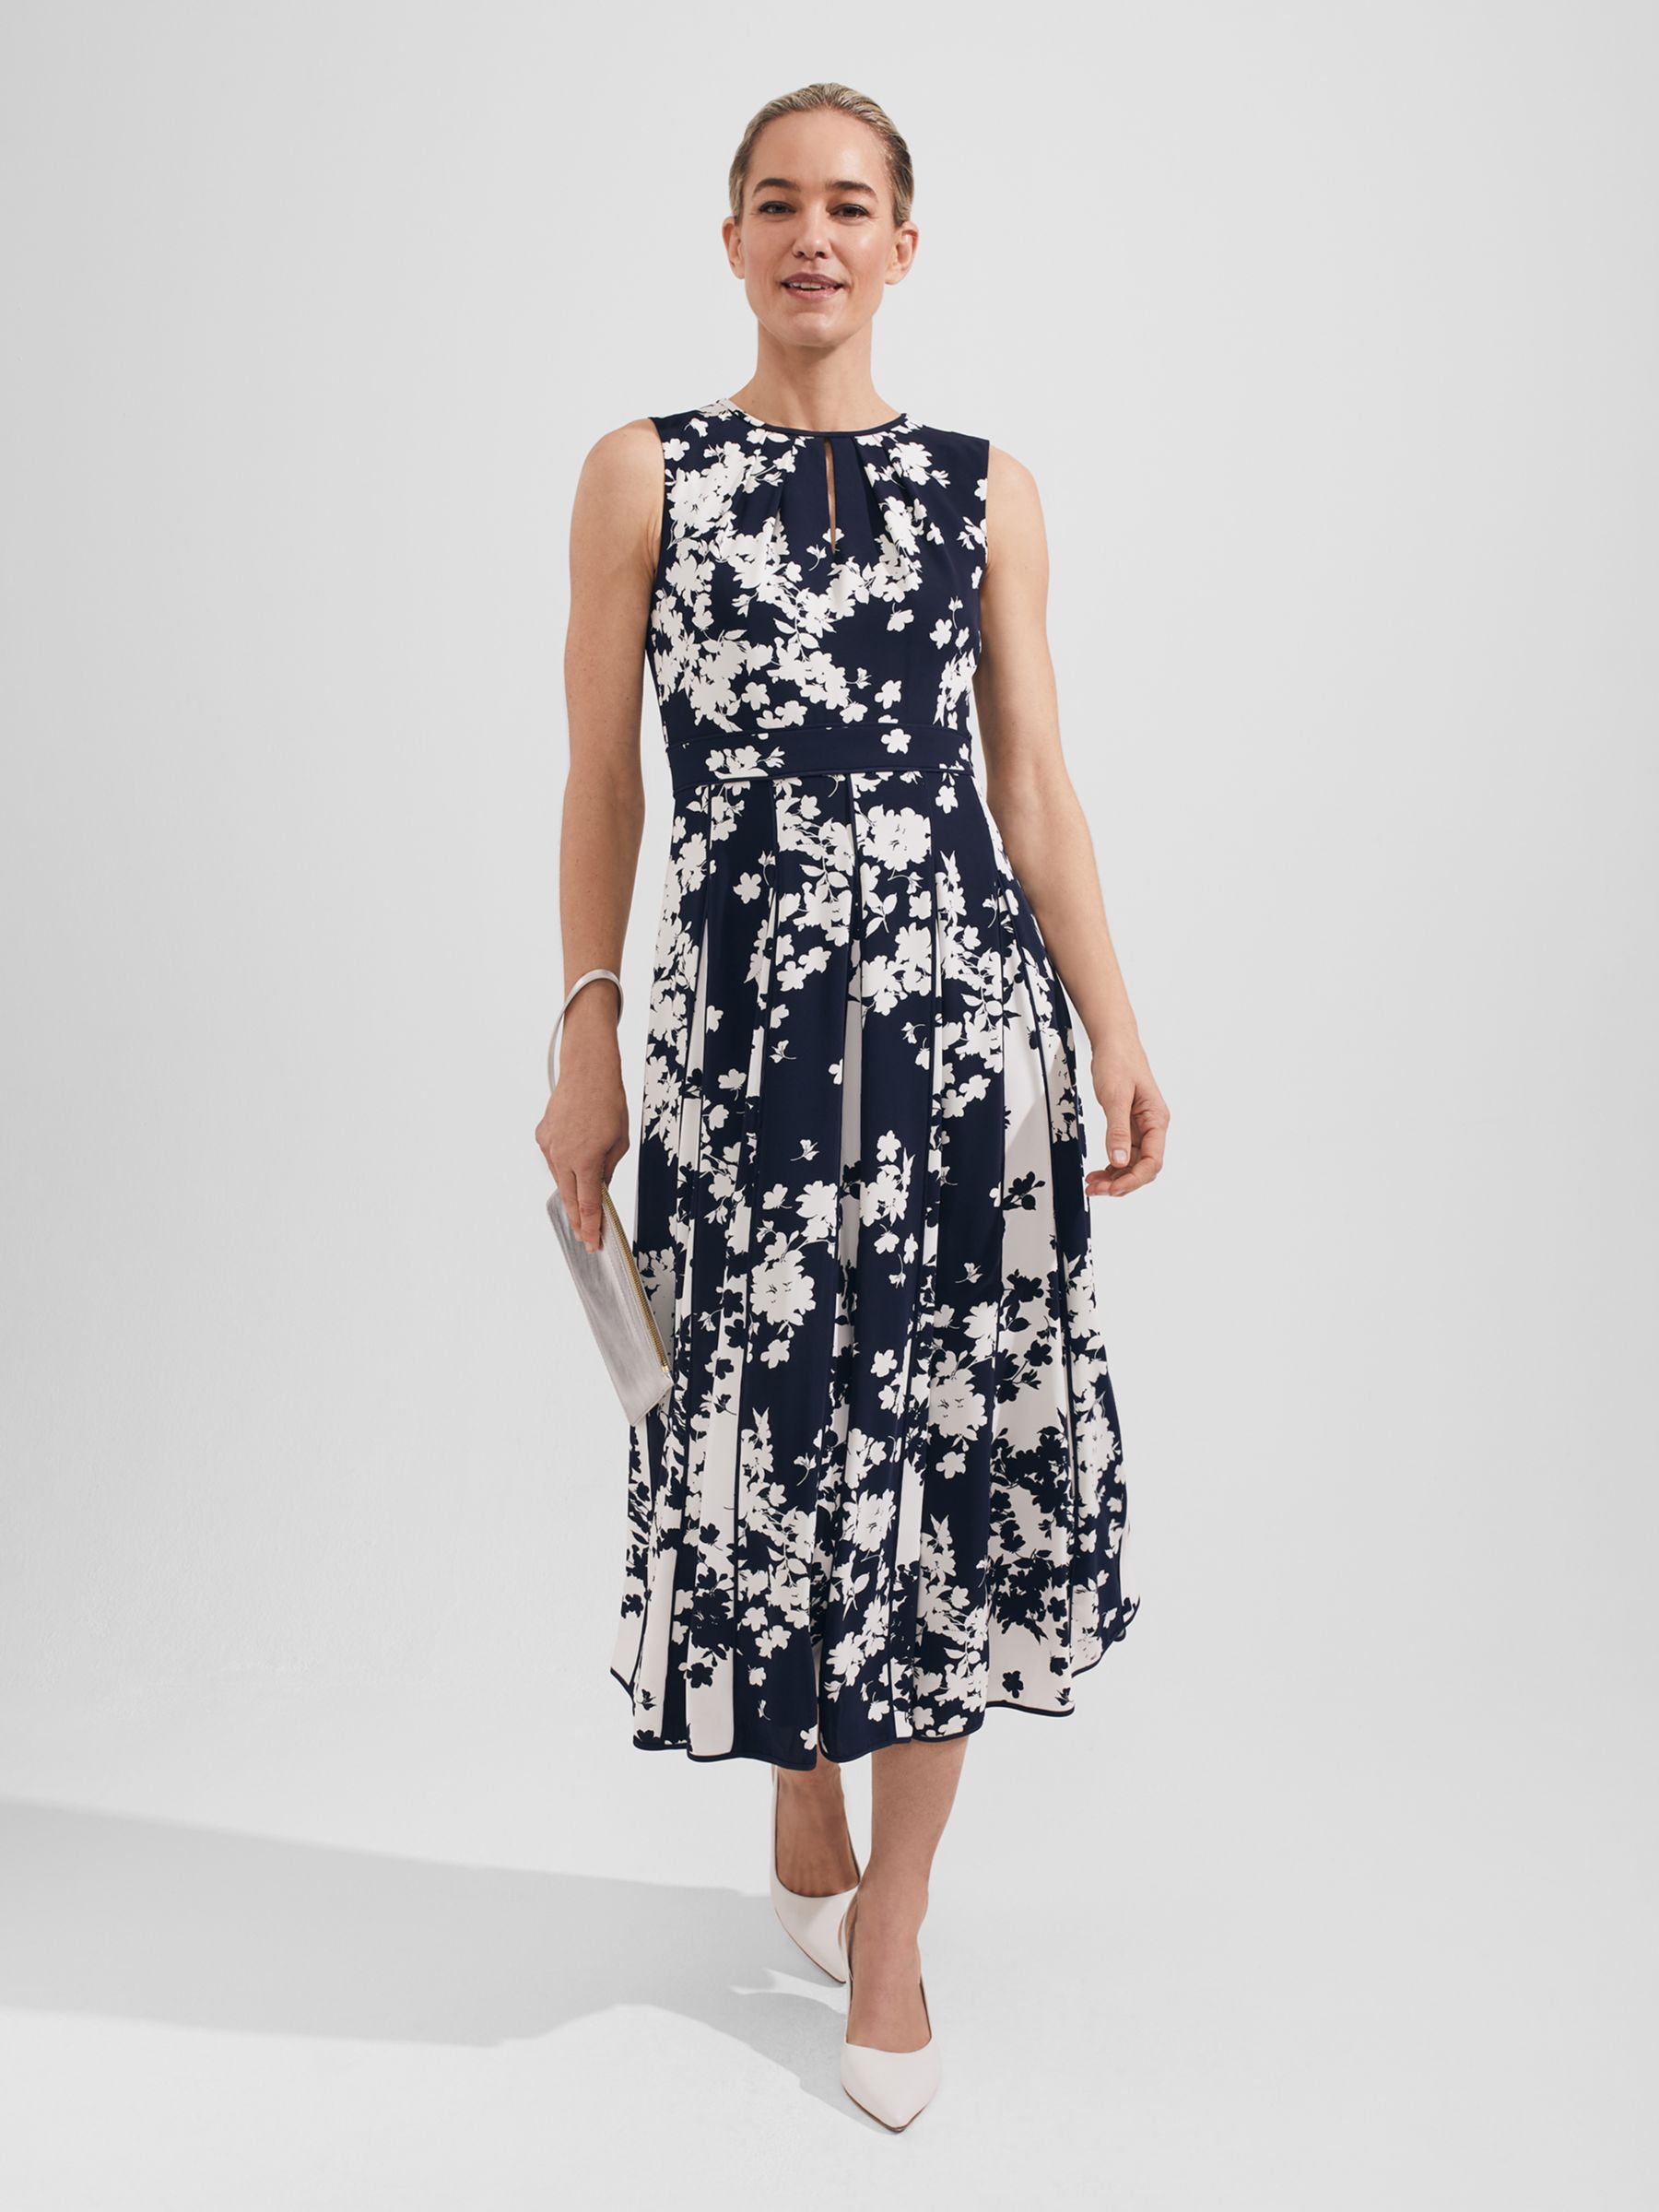 Hobbs Angelica Floral Print Dress, Midnight/Ivory at John Lewis & Partners